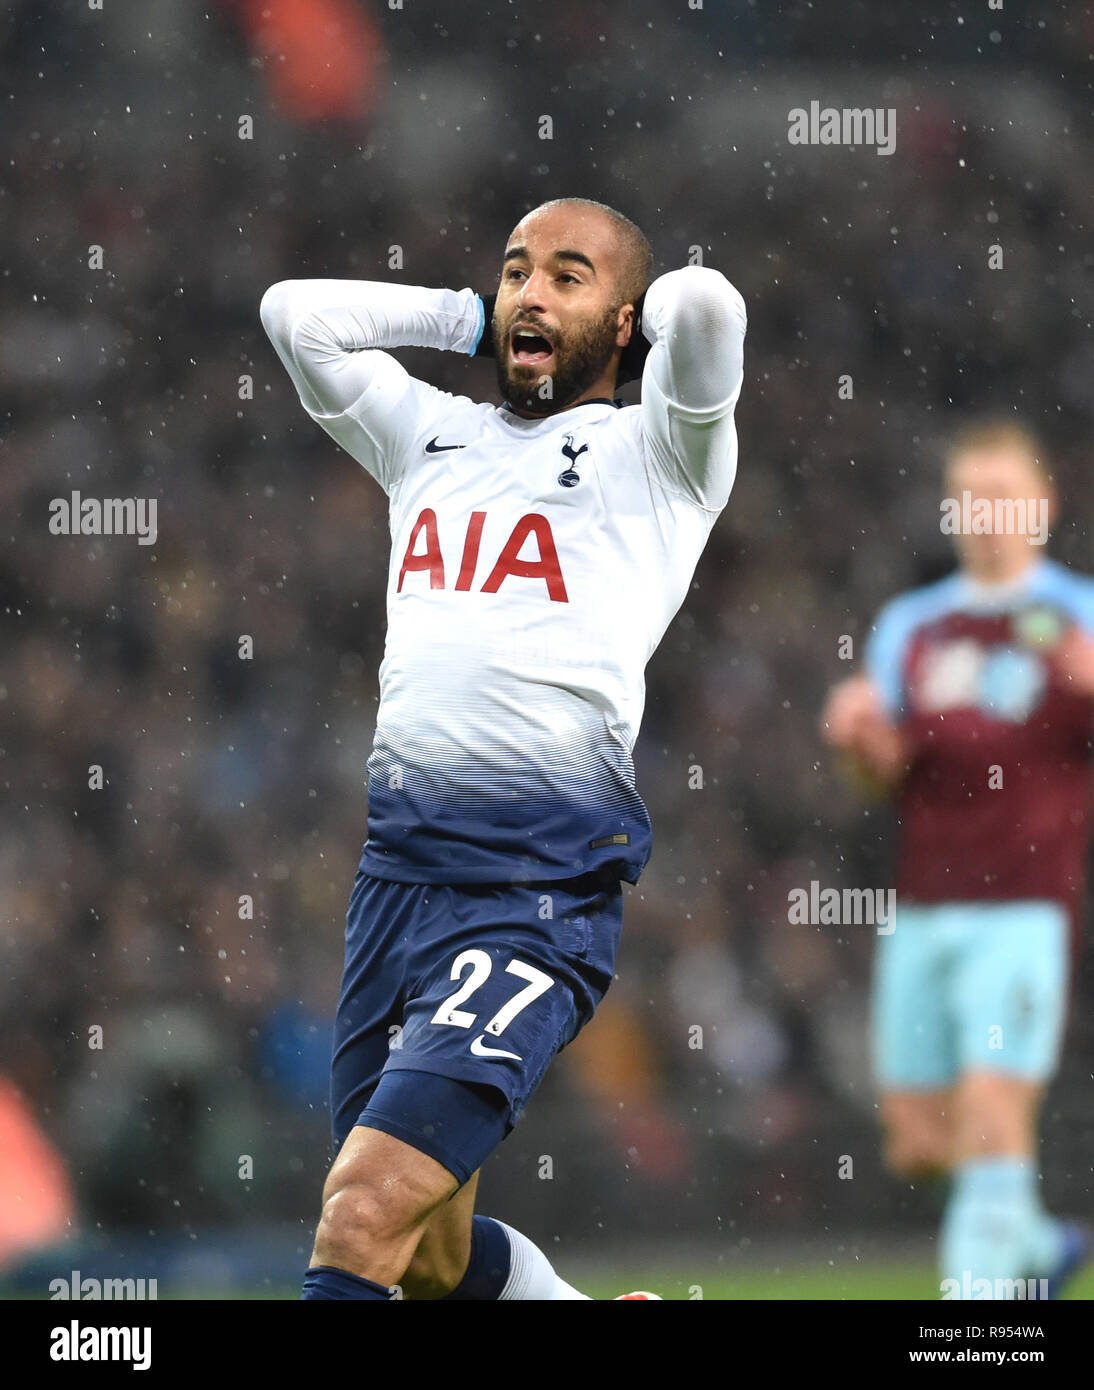 Lucas Moura of Spurs reacts after missing a chance during the Premier League match between Tottenham Hotspur and Burnley at Wembley Stadium ,London , 15 December 2018 Editorial use only. No merchandising. For Football images FA and Premier League restrictions apply inc. no internet/mobile usage without FAPL license - for details contact Football Dataco Stock Photo